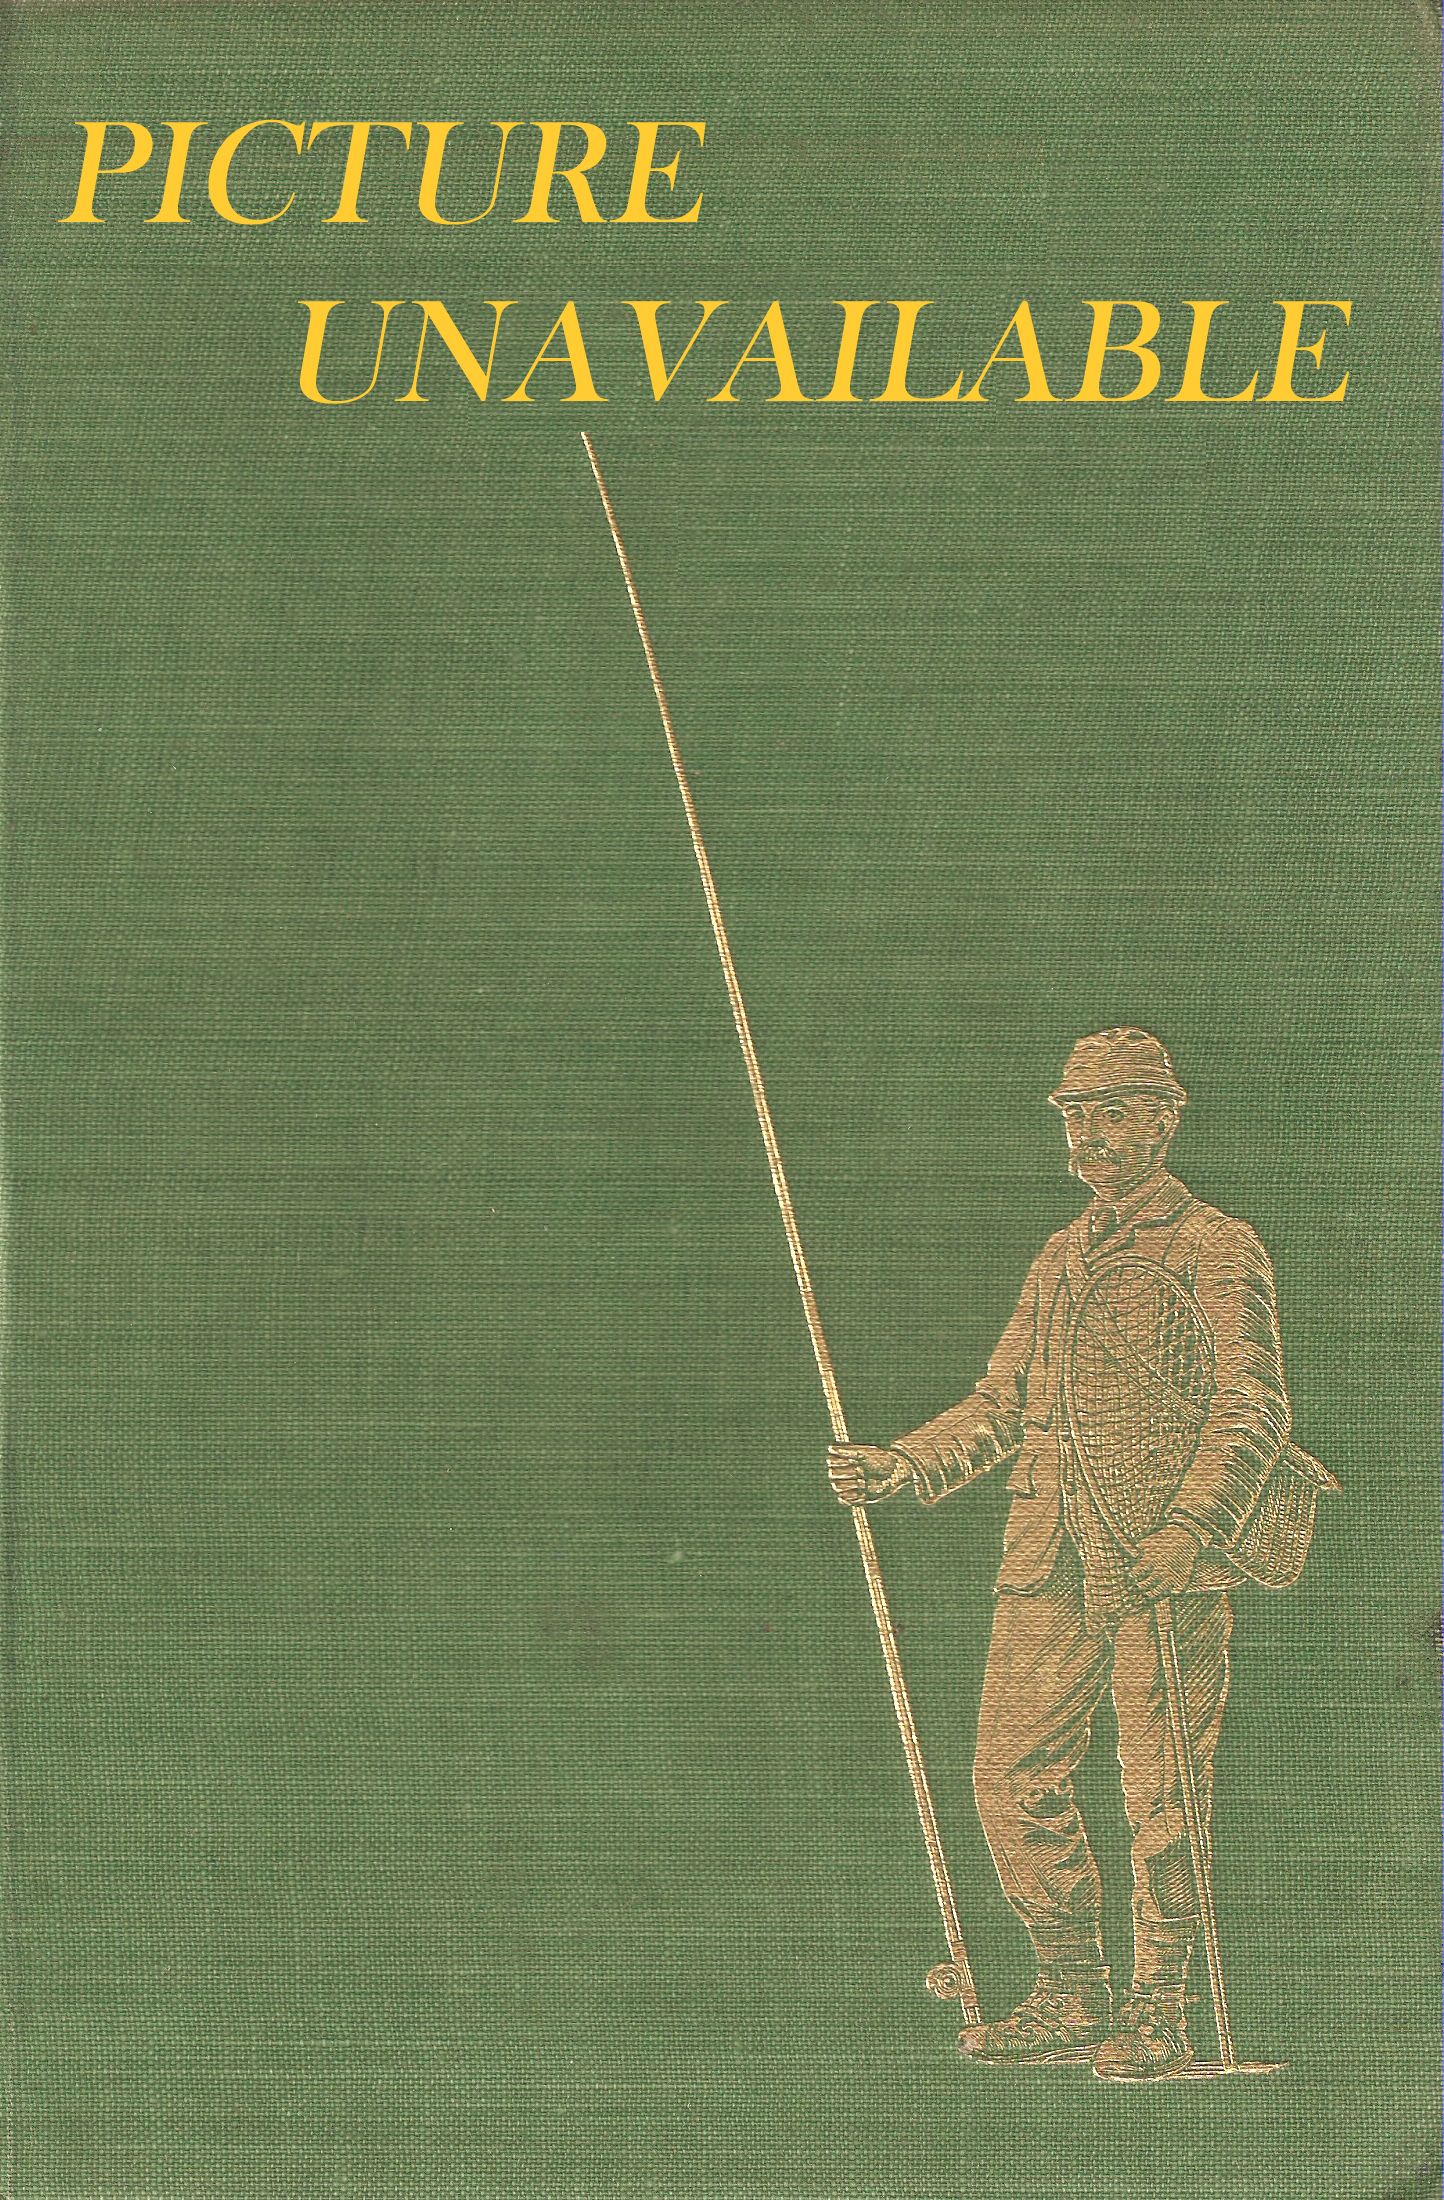 A LITTLE FISHING BOOK. By Cecil, Lord Harmsworth. With a chapter by Alfred  W. Lunn of Stockbridge.